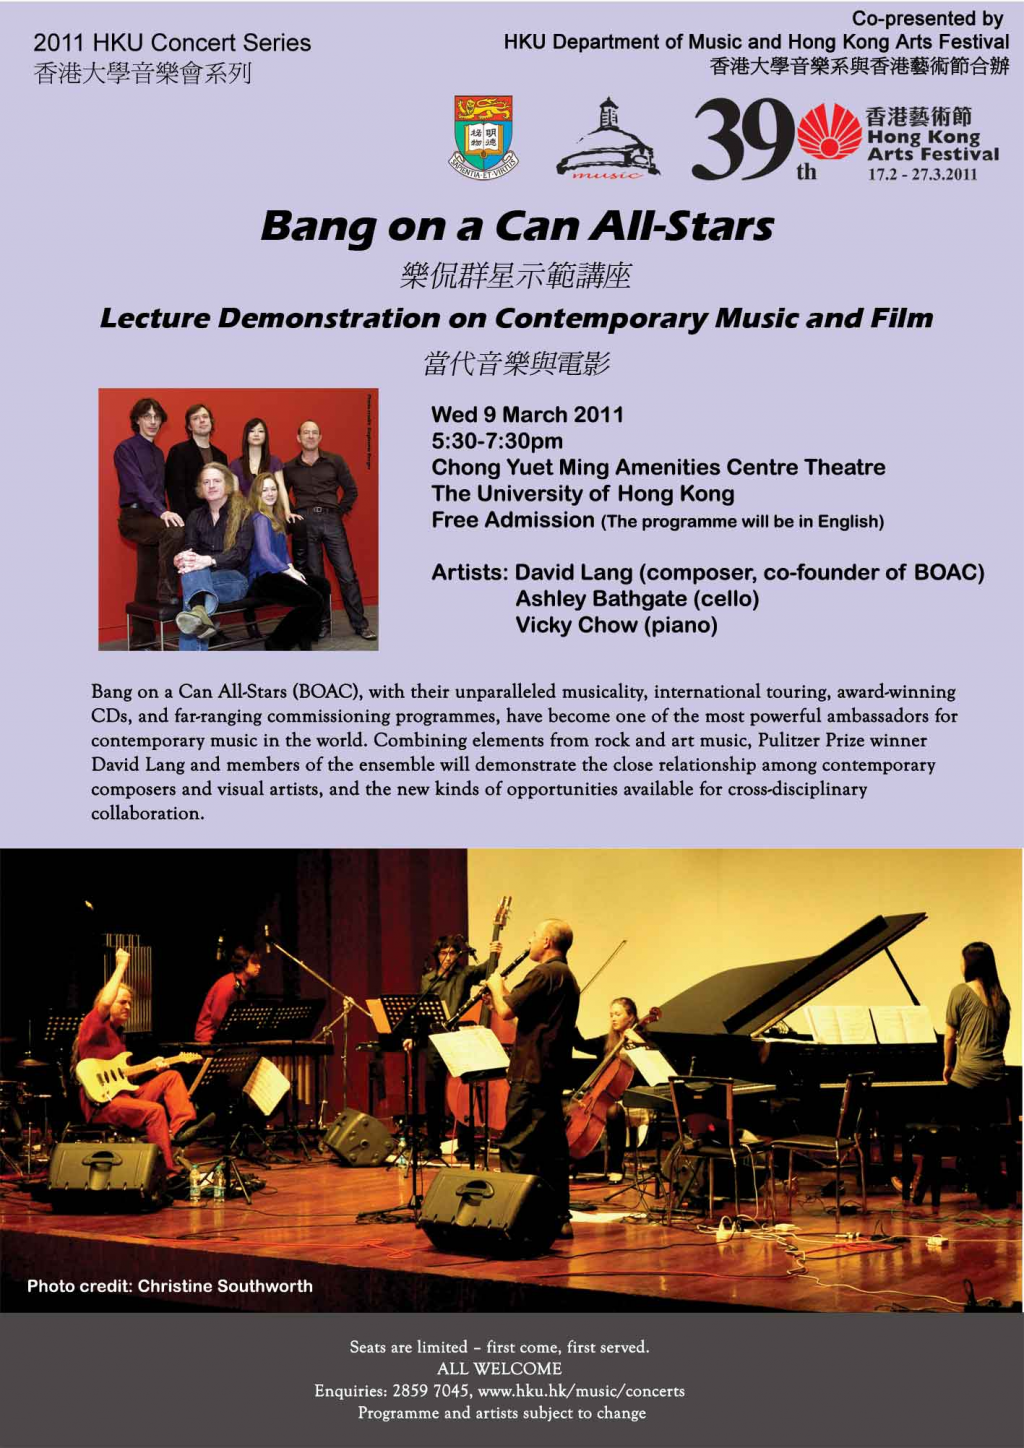 Bang on a Can All-Stars (BOAC), with their unparalleled musicality, international touring, award-winning CDs, and far-ranging commissioning programmes, have become one of the most powerful ambassadors for contemporary music in the world. Combining el